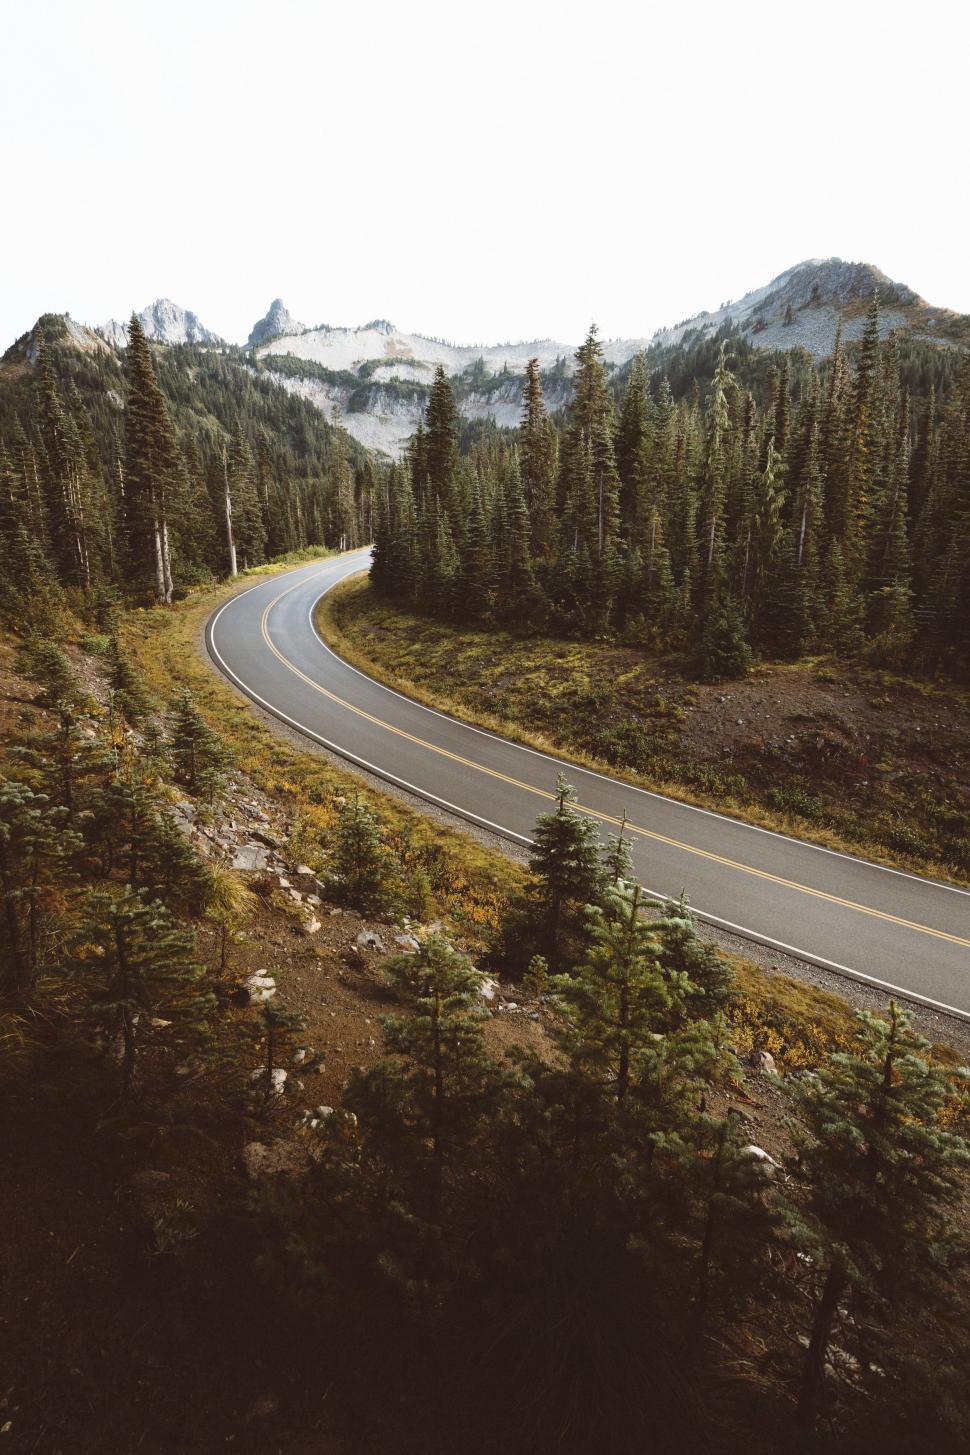 Free Image of Winding Road Through Forest 